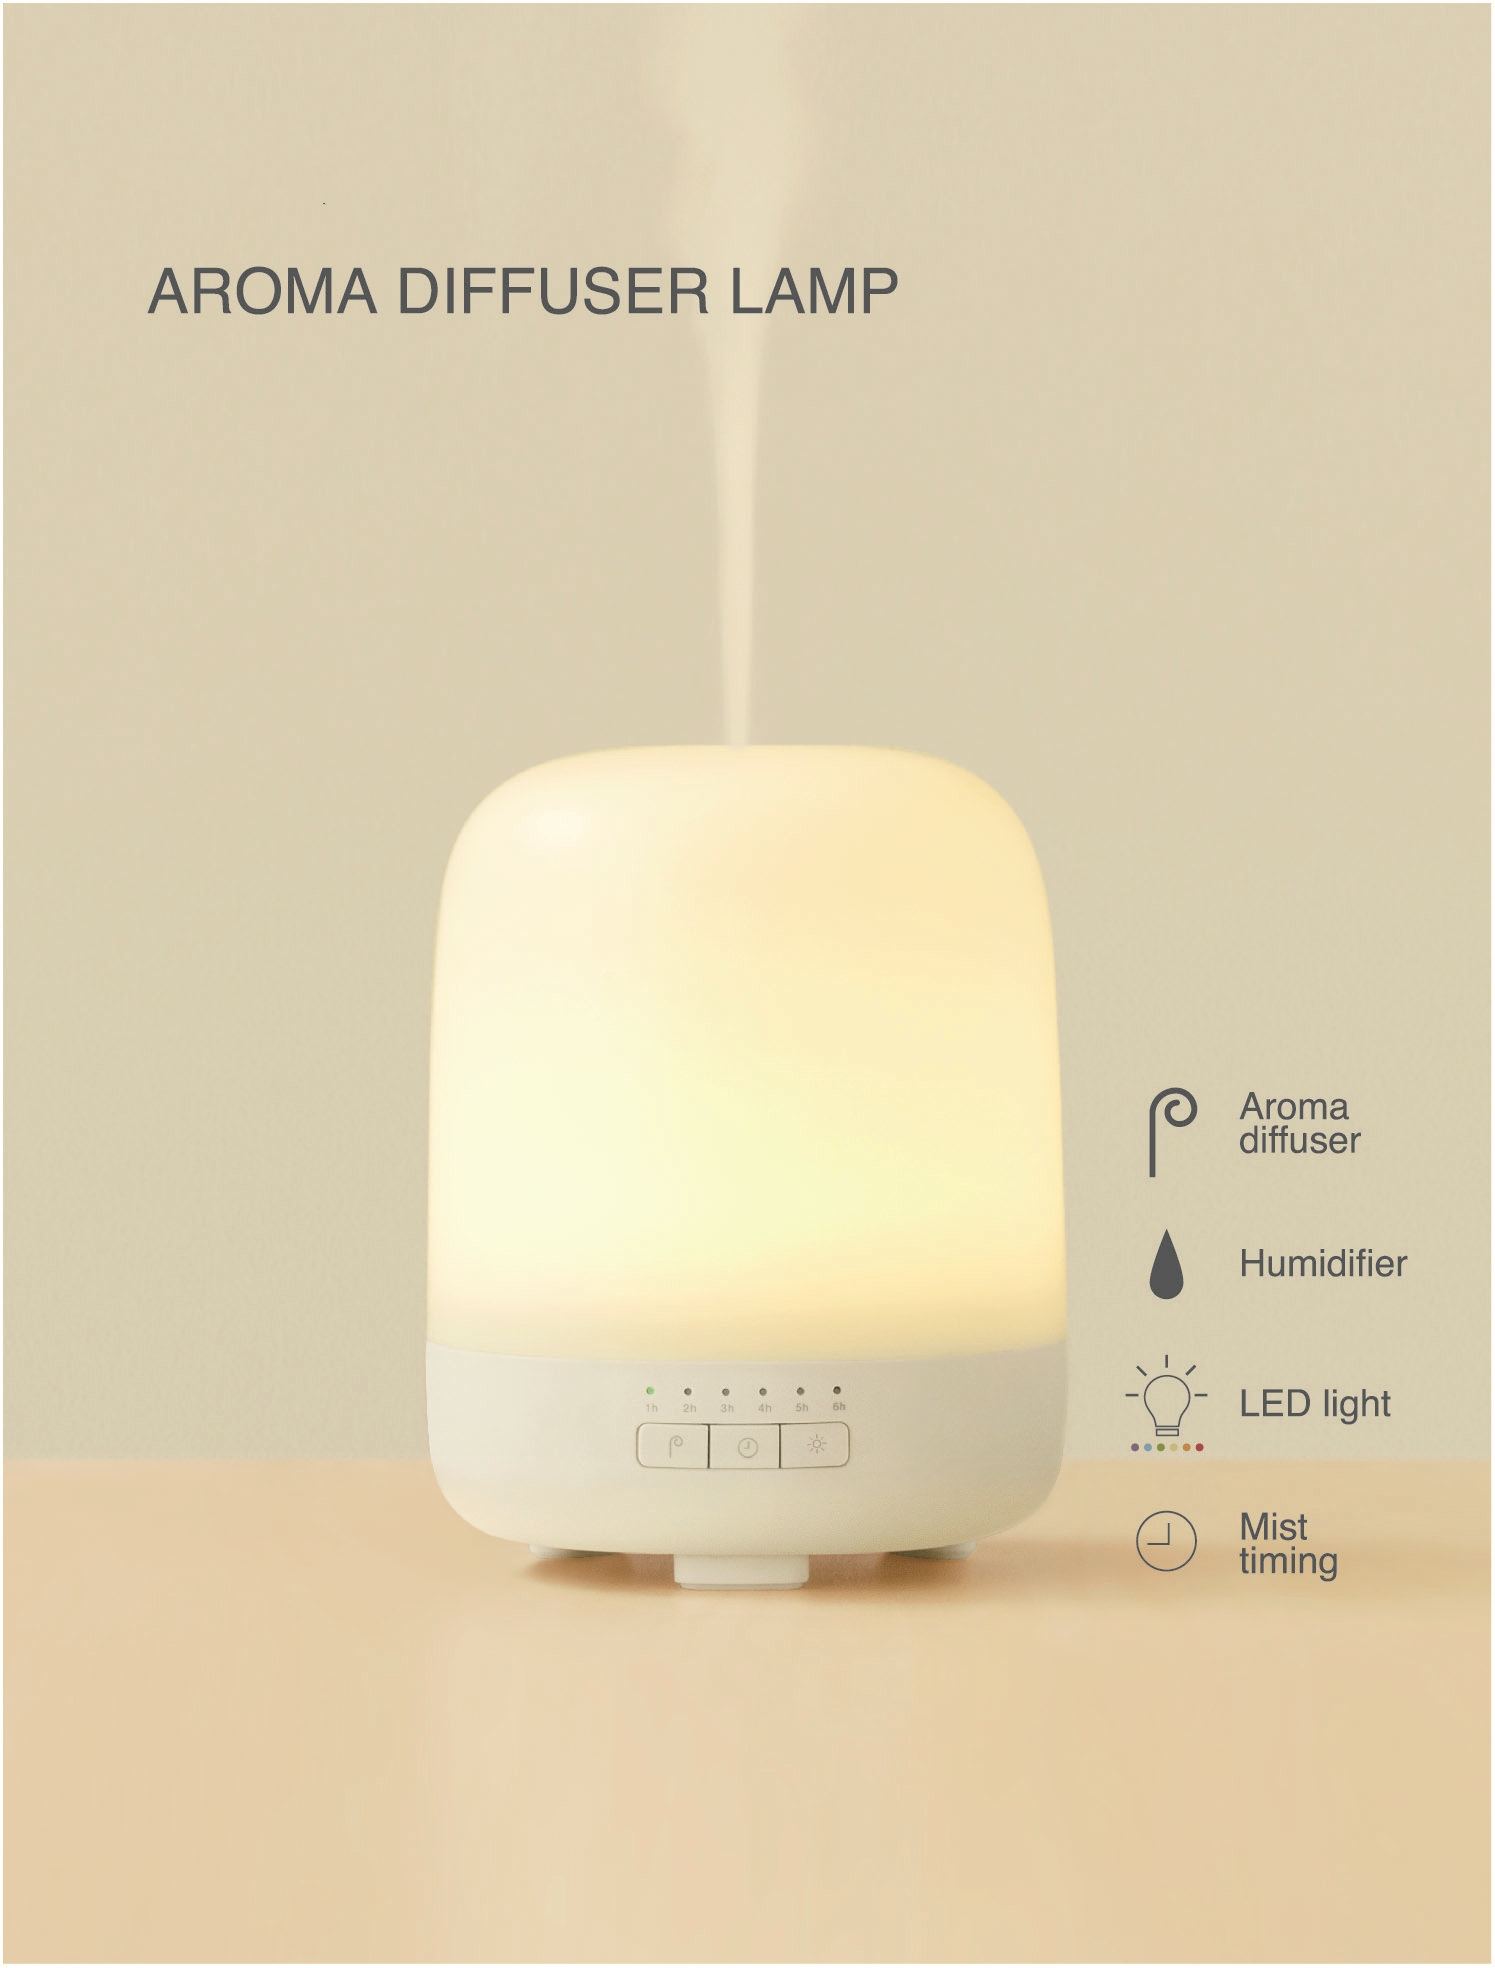 Aroma difuser lamp combines aromatherapy humidifier lamp mist5-1